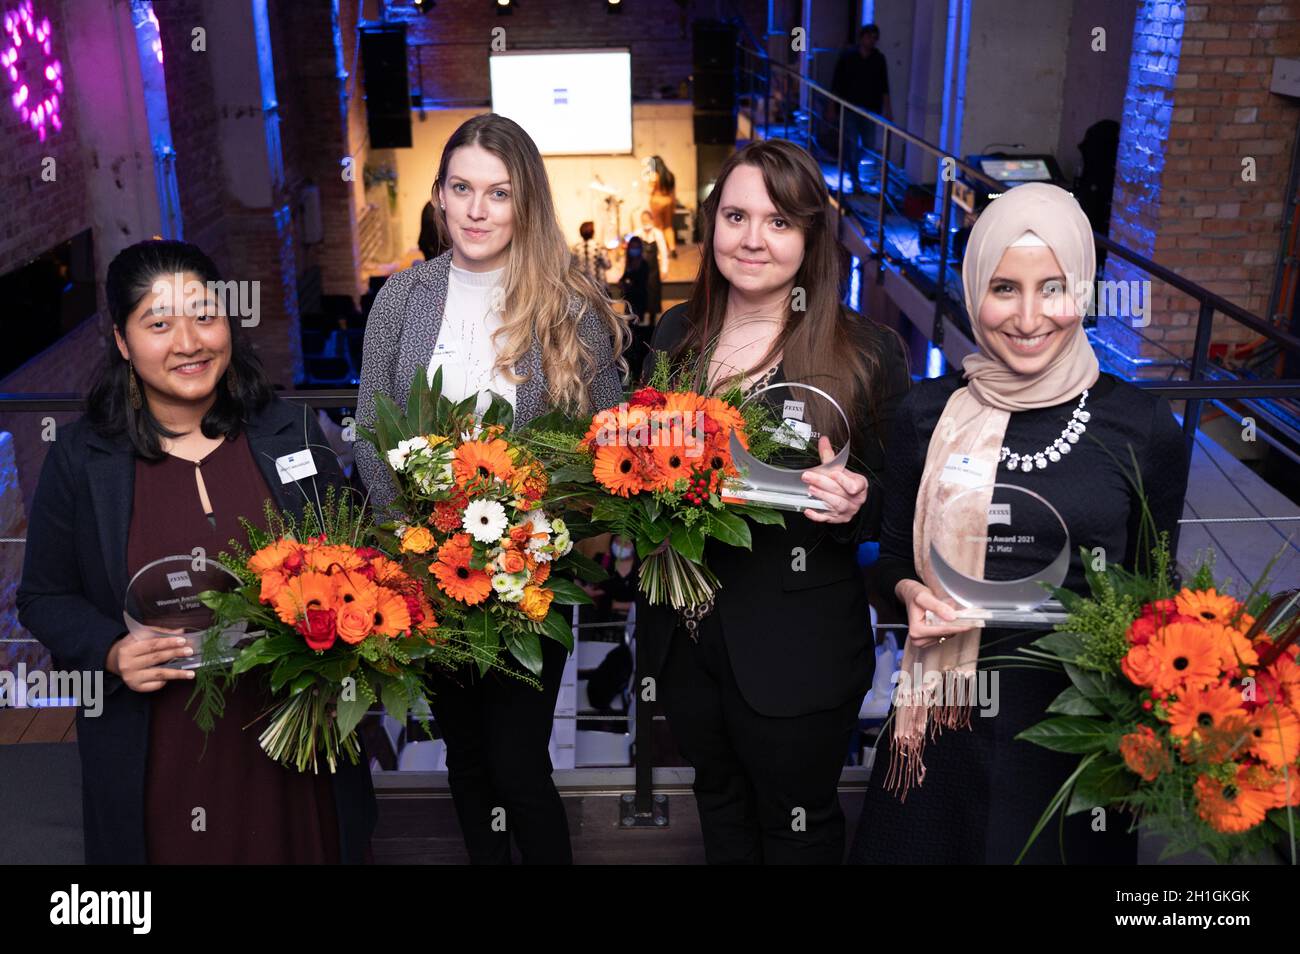 Dresden, Germany. 18th Oct, 2021. The award winners Drishti Maharjan (l-r),  Corina Hampel, Sarah-Lee Mendenhall and Houda El-Messari stand next to each  other at the award ceremony of the 11th Zeiss Women